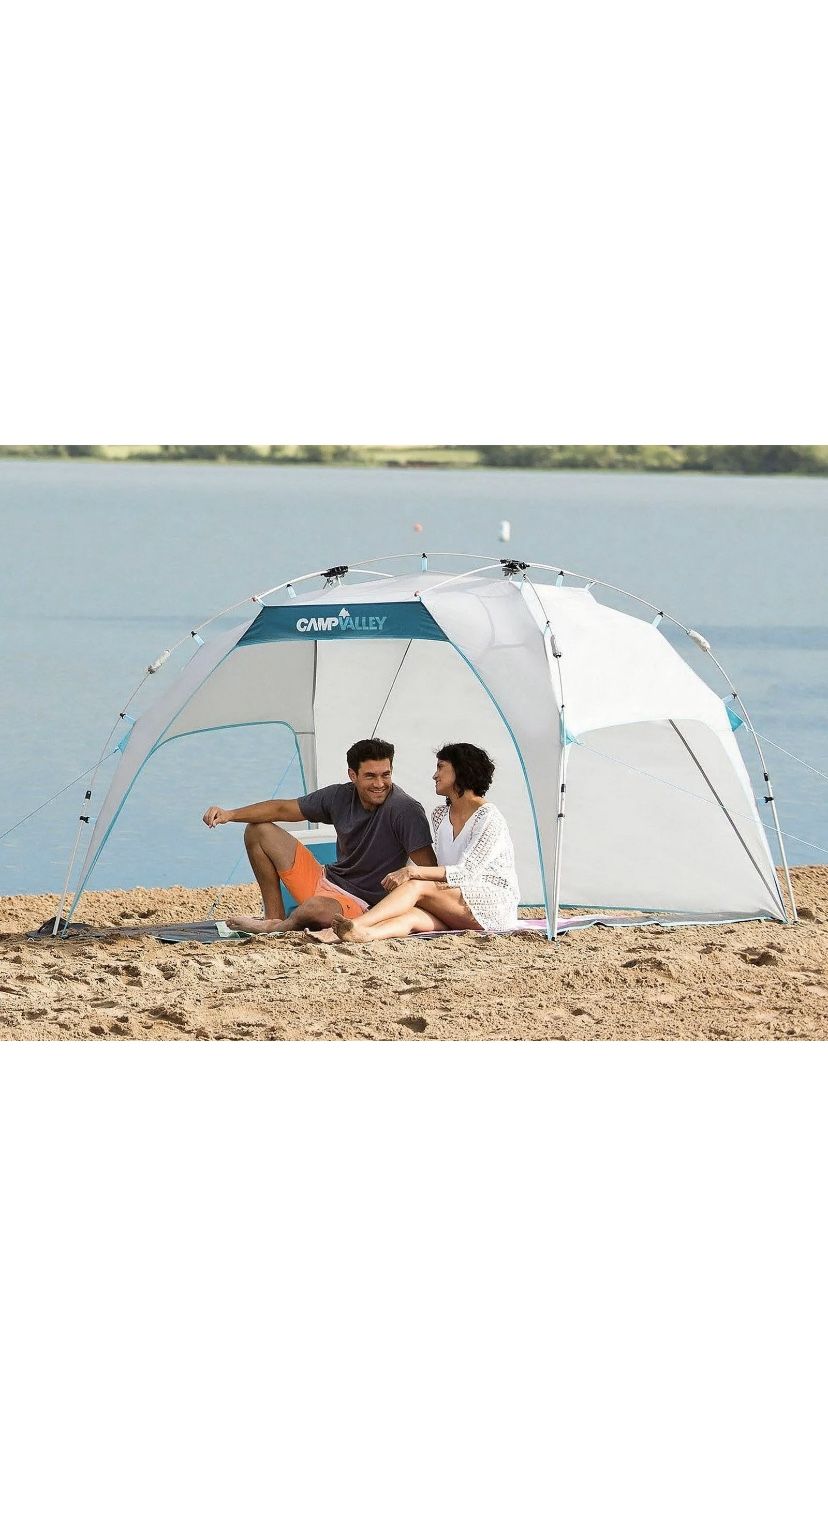 BRAND NEW!! - Camp Valley 8 x 6 Instant Sport Sun Shade Shelter UV Tent Beach